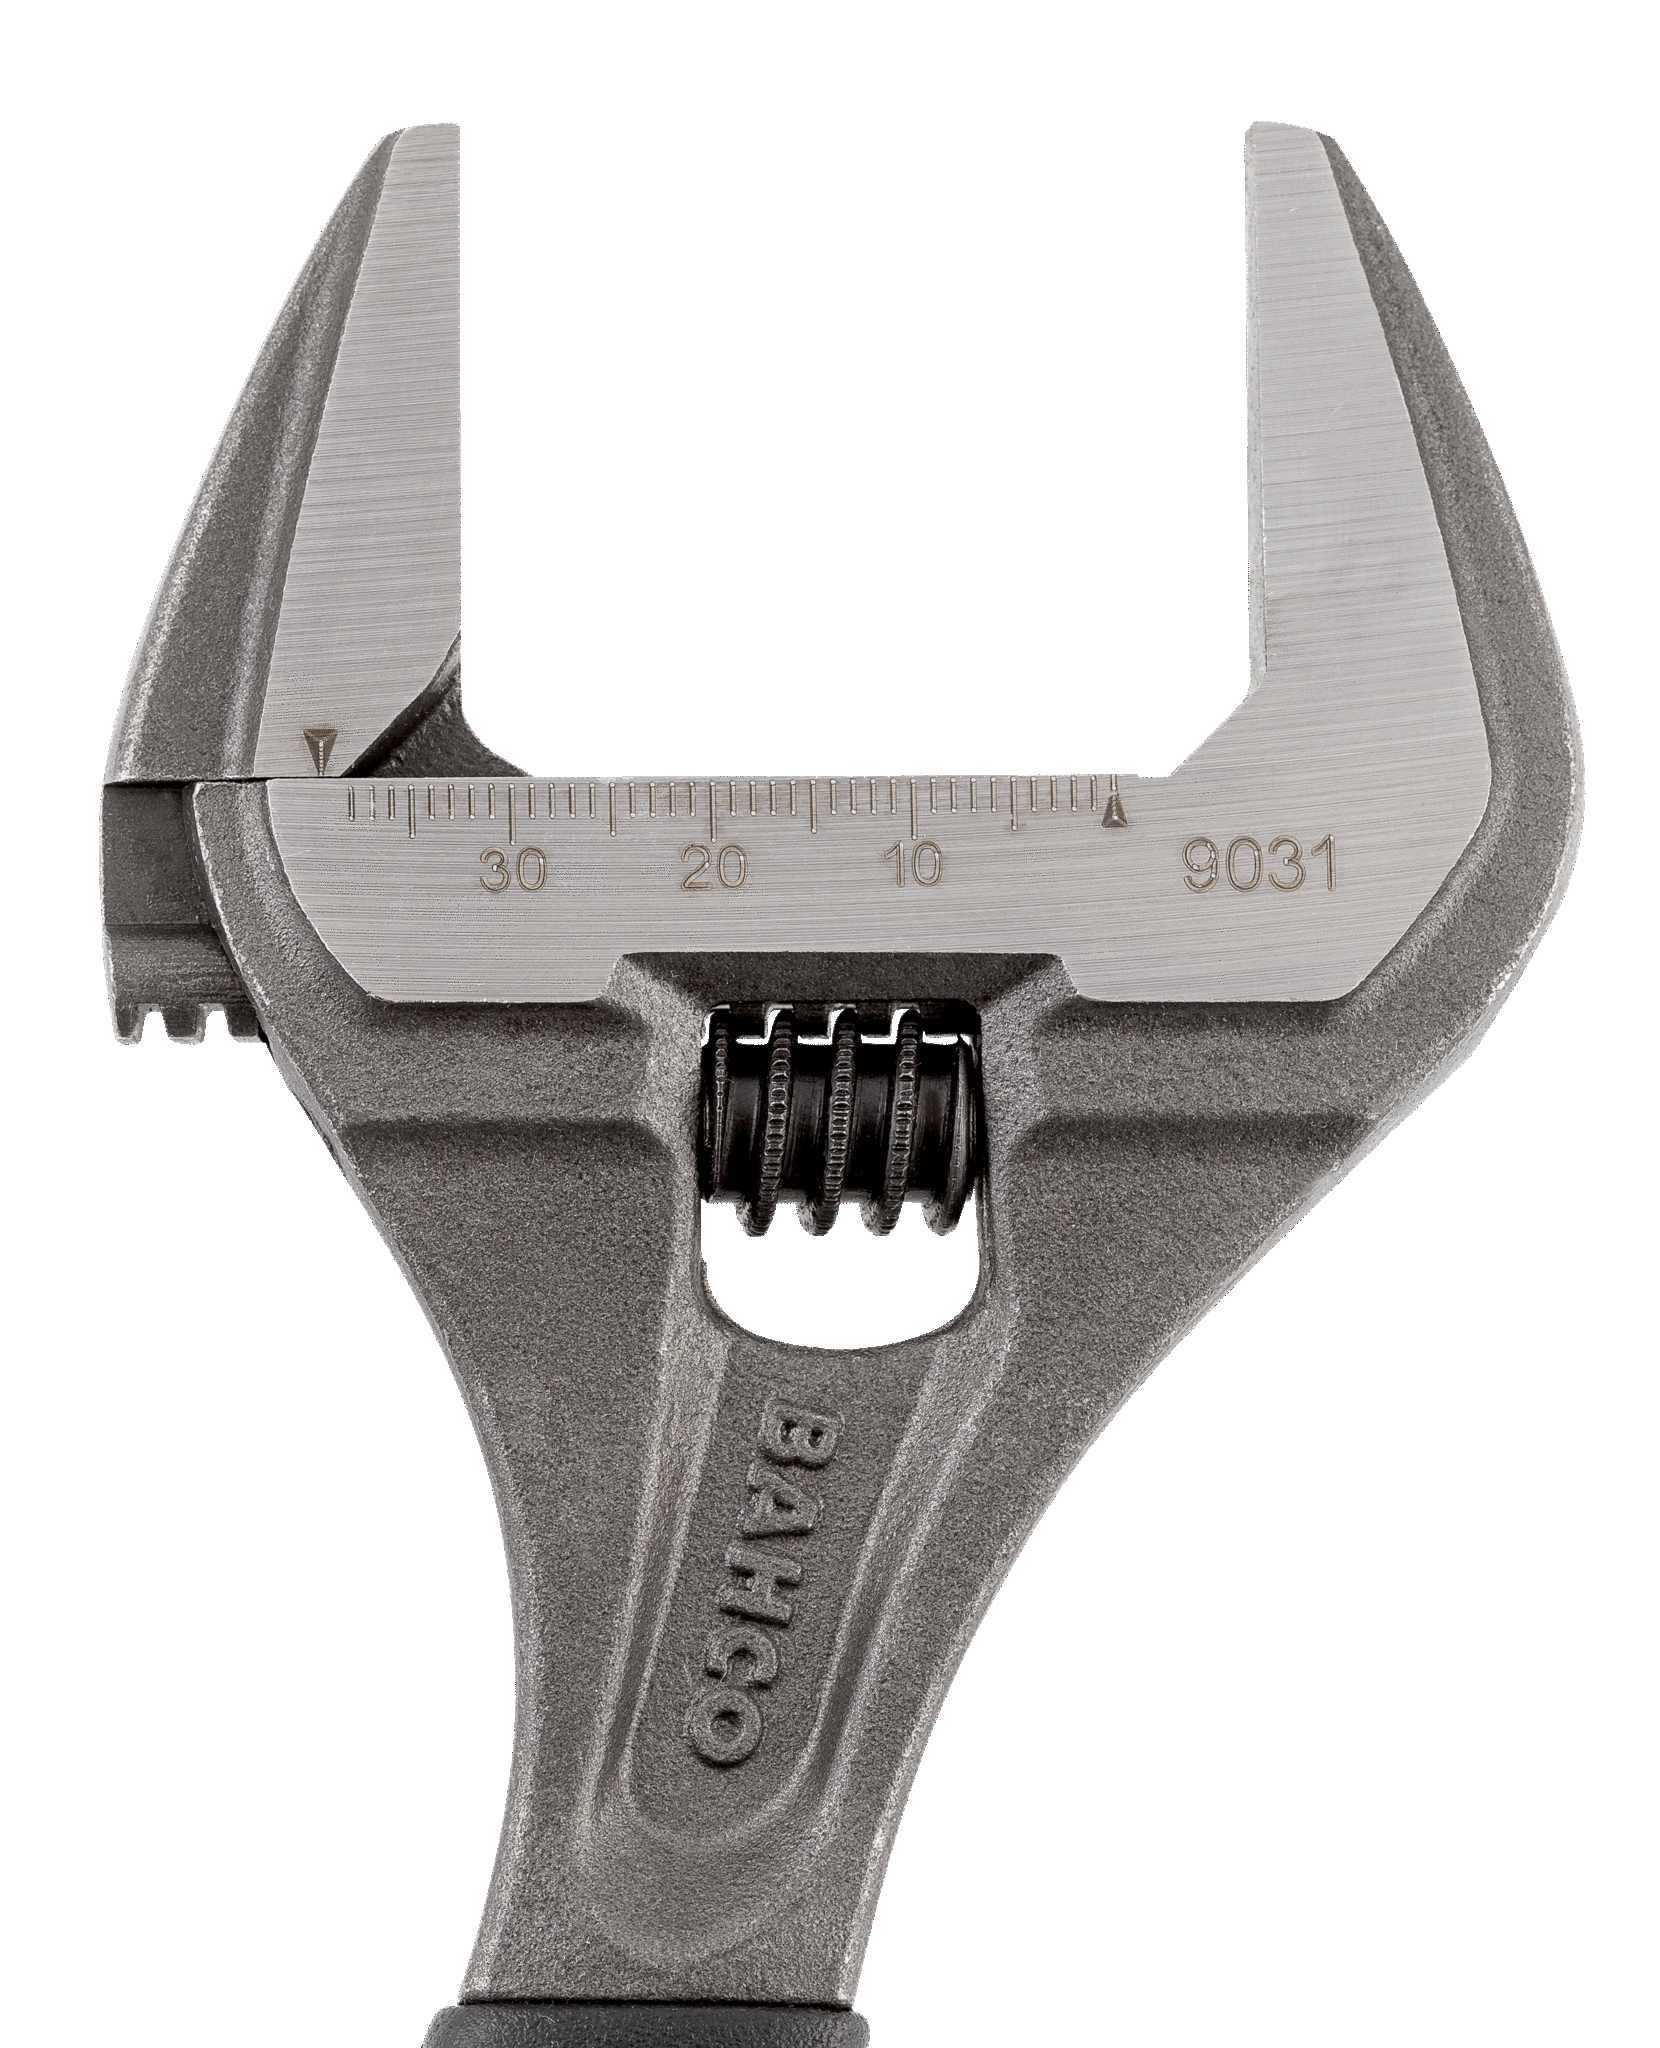 ERGO™ Central Nut Wide Opening Jaw Adjustable Wrenches with Rubber Handle and Phosphate Finish - 9033 by Bahco